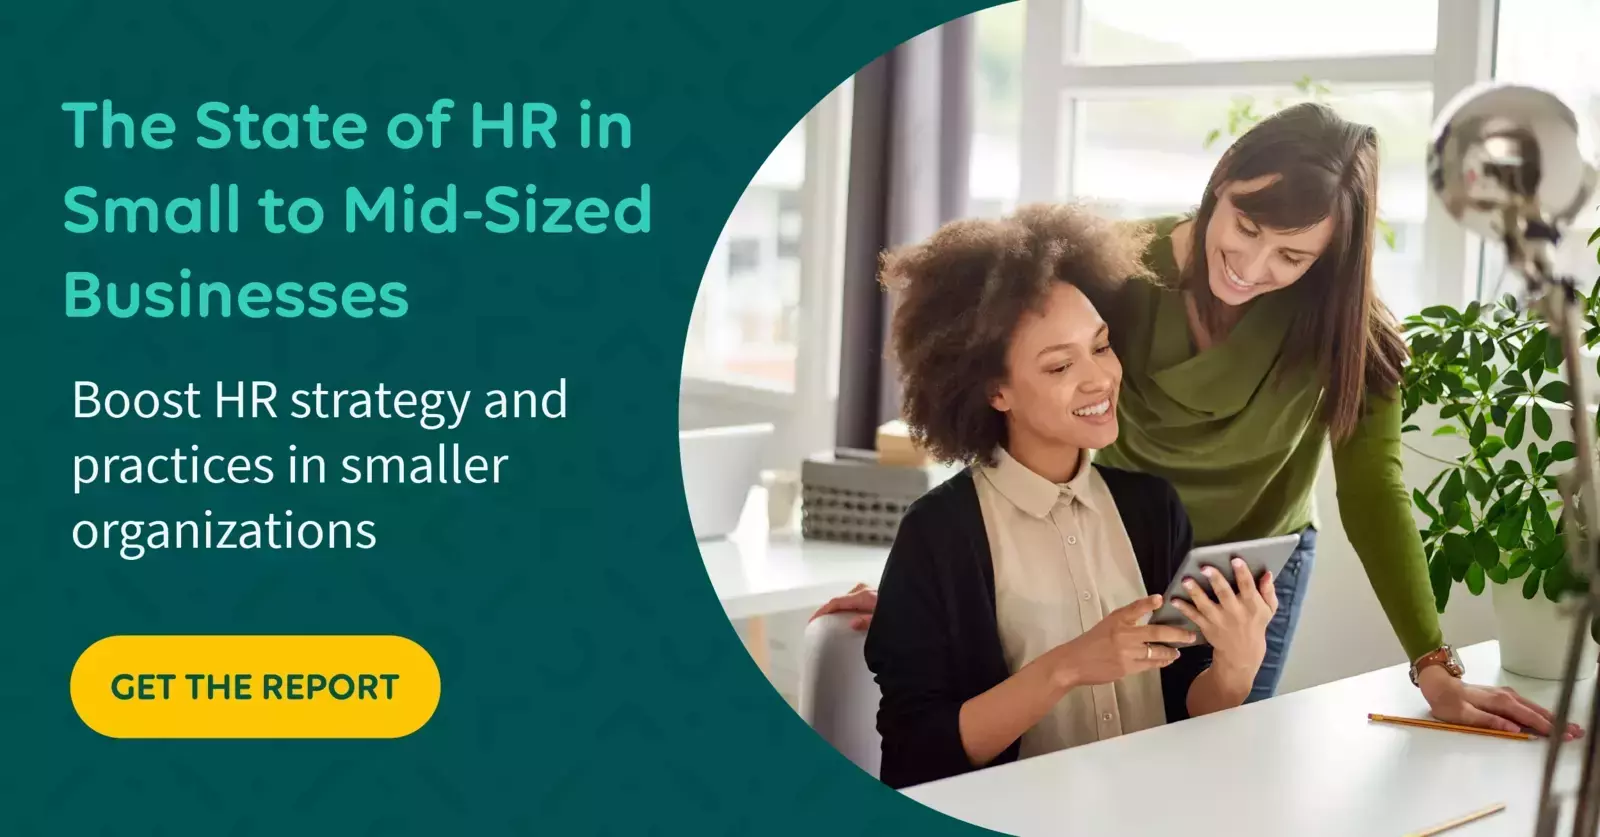 The State of the HR Function in Small to Mid-Sized Businesses pay equity banner